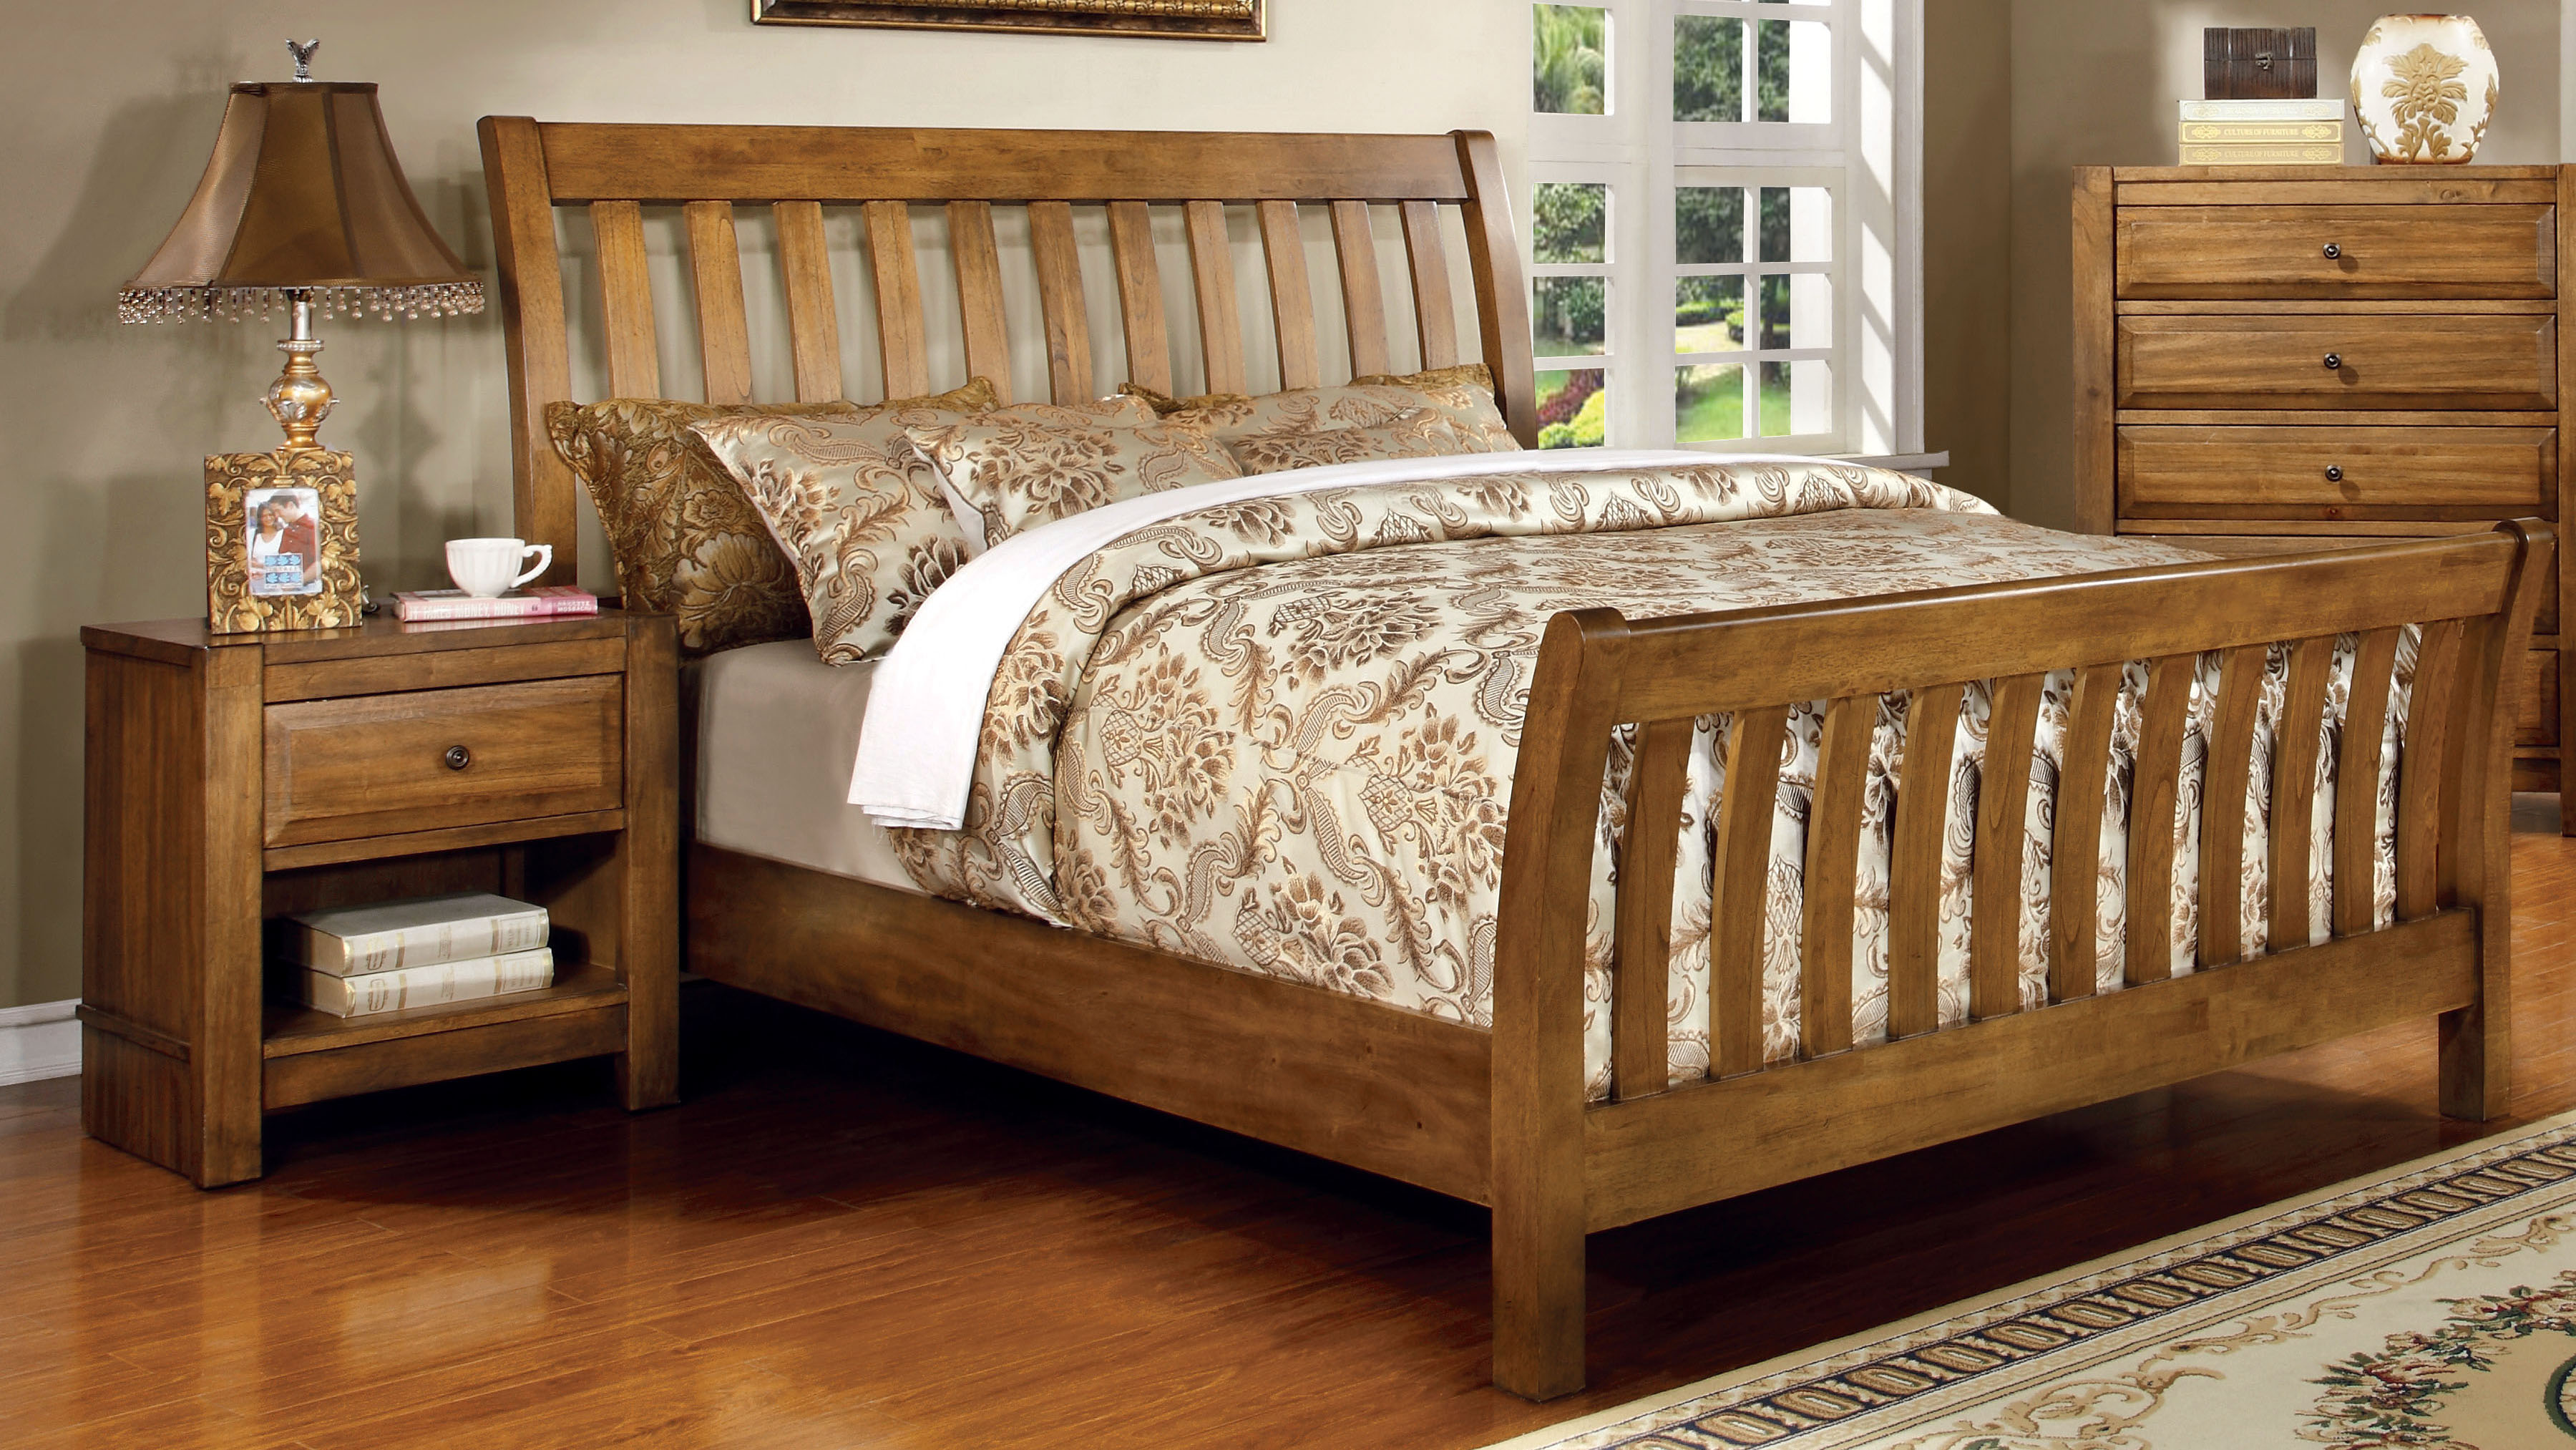 Furniture of America Rustic Oak Lyra Country Style Sleigh Bed